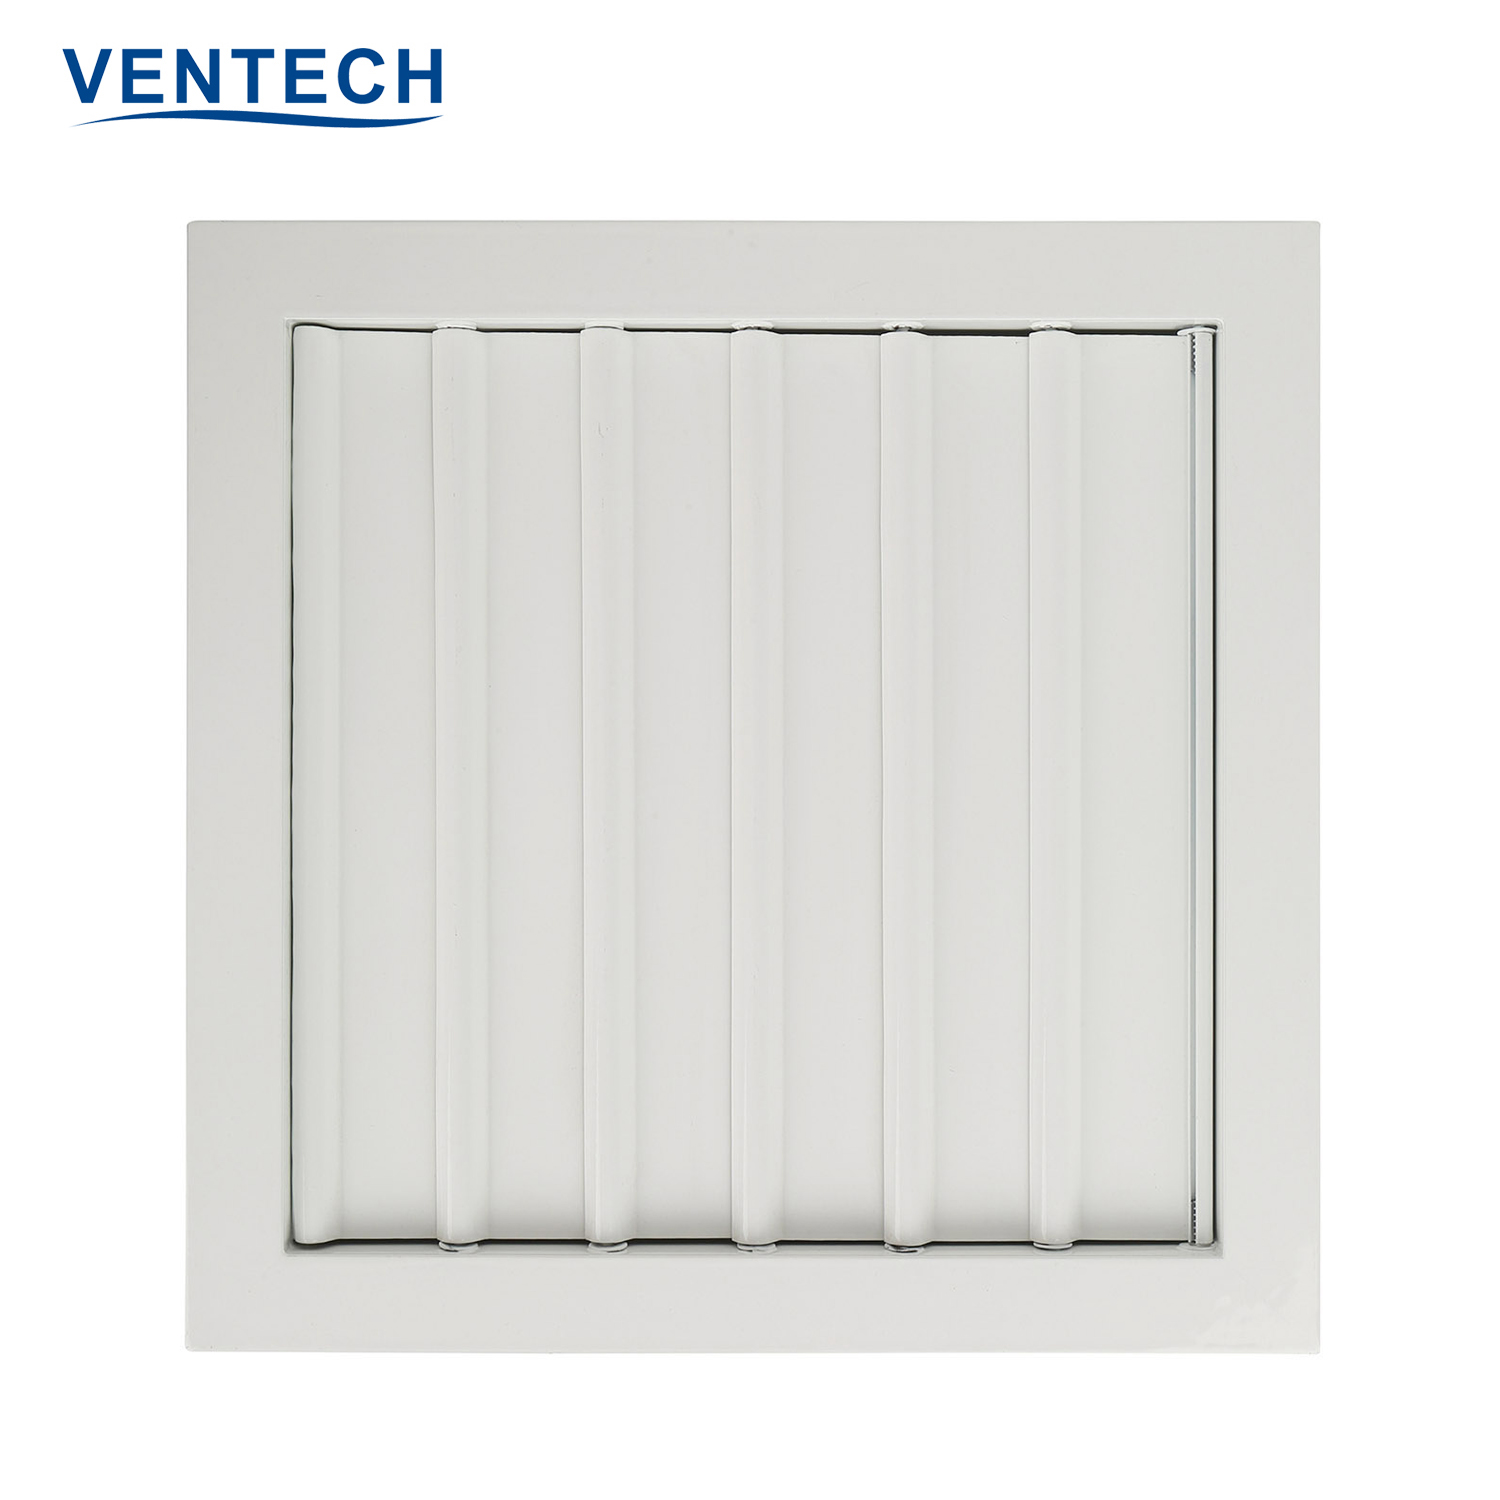 Ventech wall louver vent supply for large public areas-2